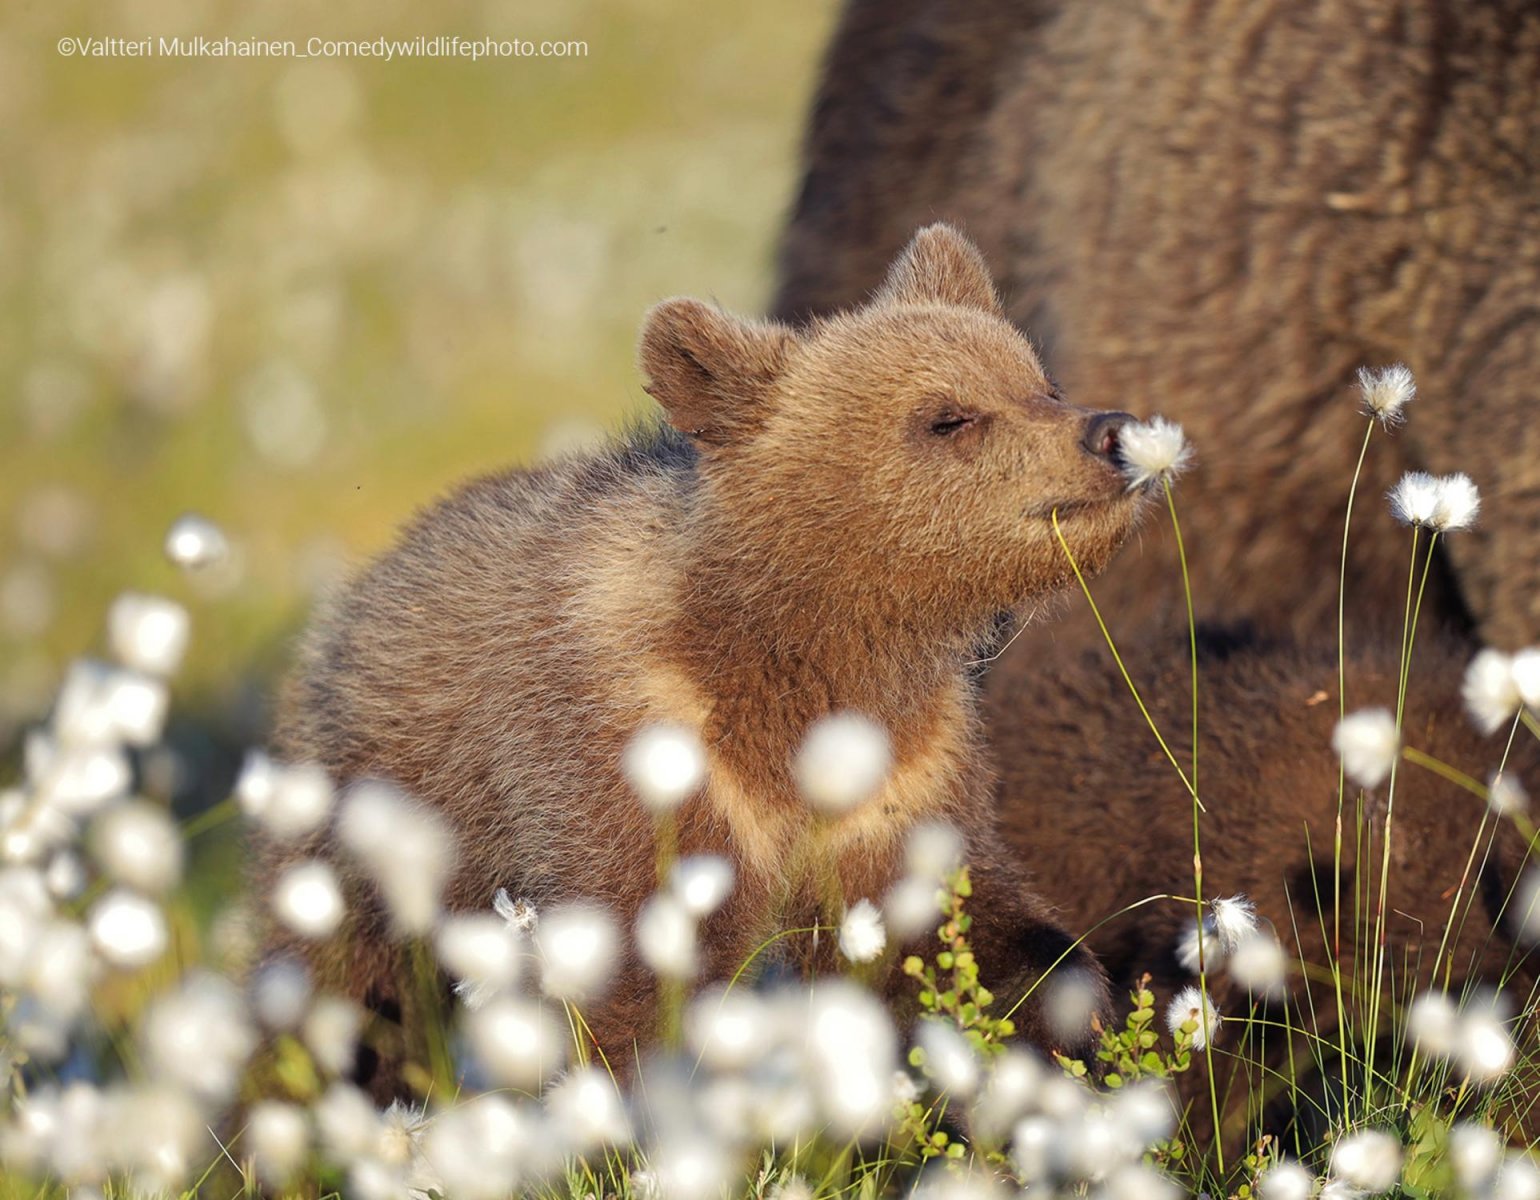 A bear cub surrounded by wild flowers close its eyes as it sniffs a flower. 